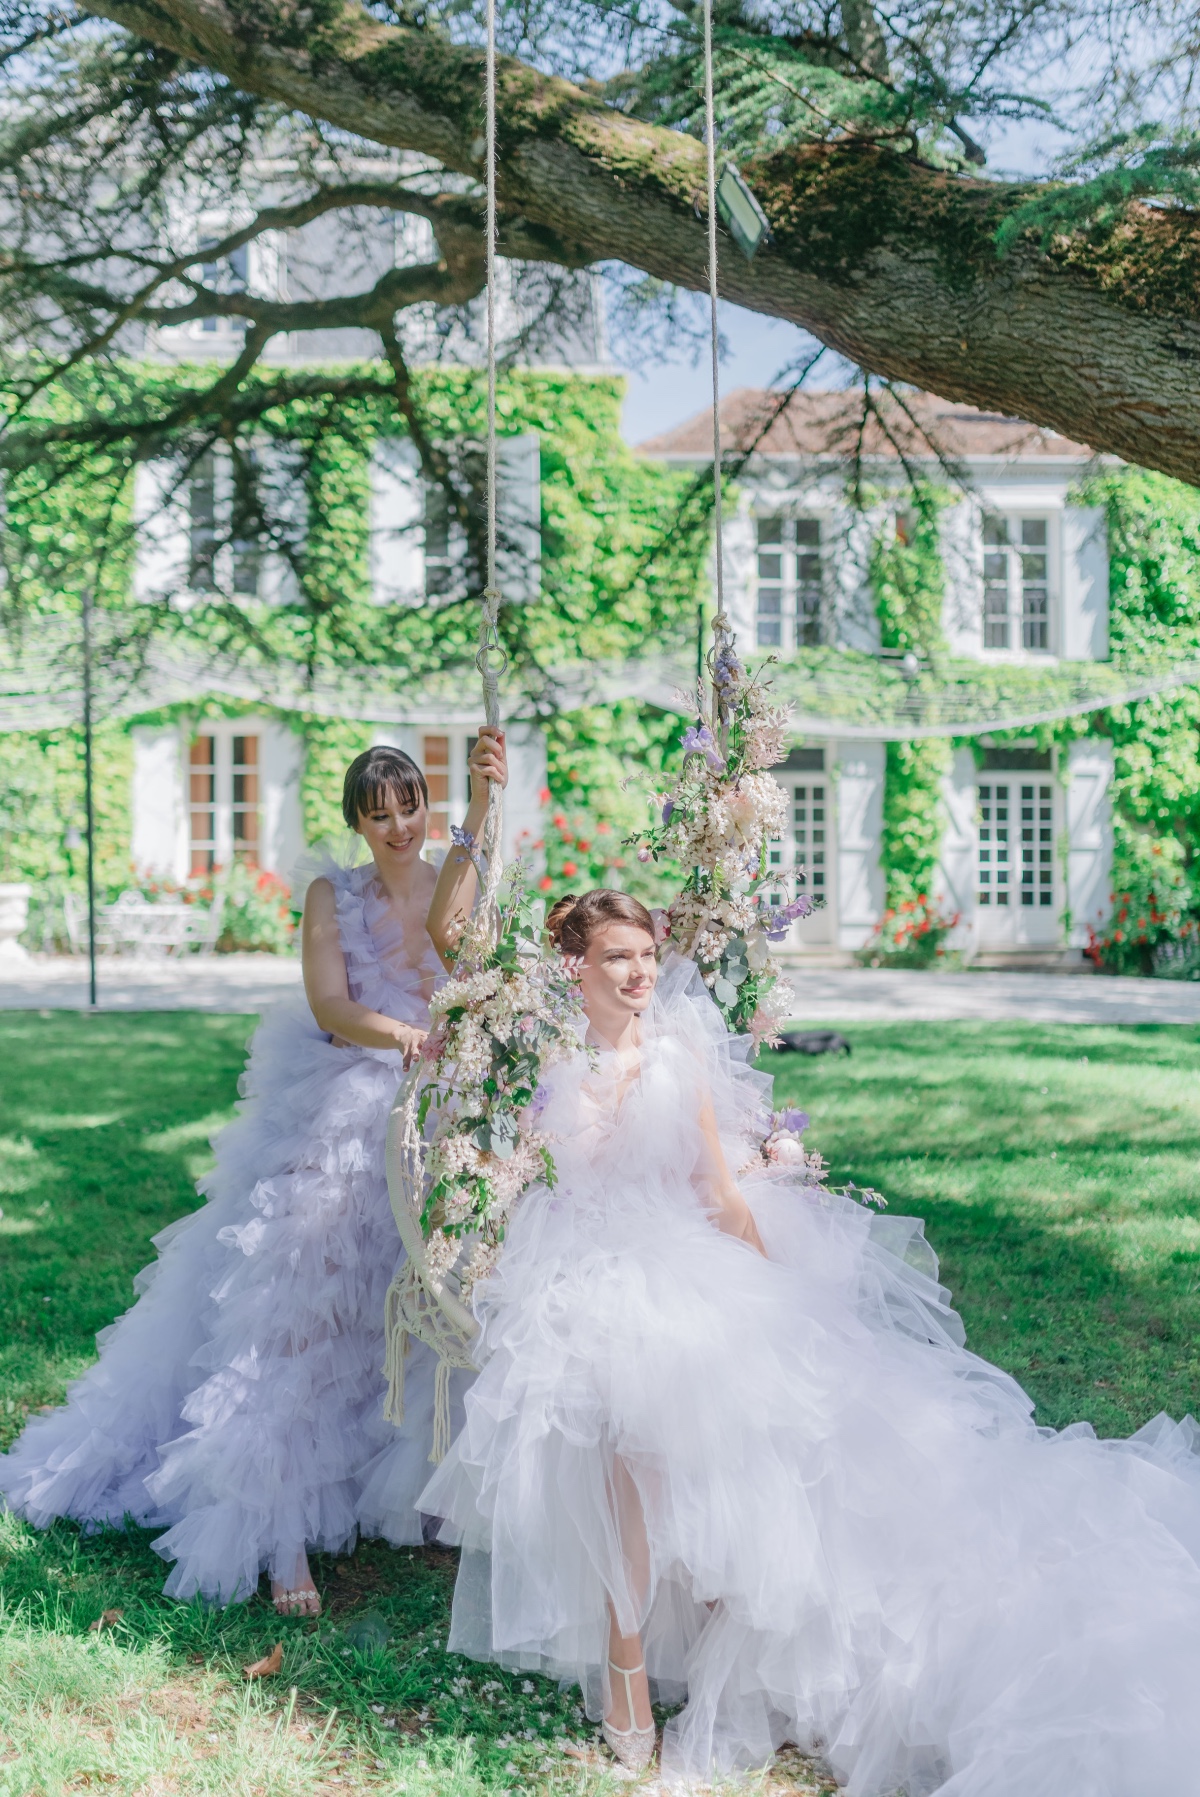 Bride and bridesmaid in tulle dresses on decorated swing